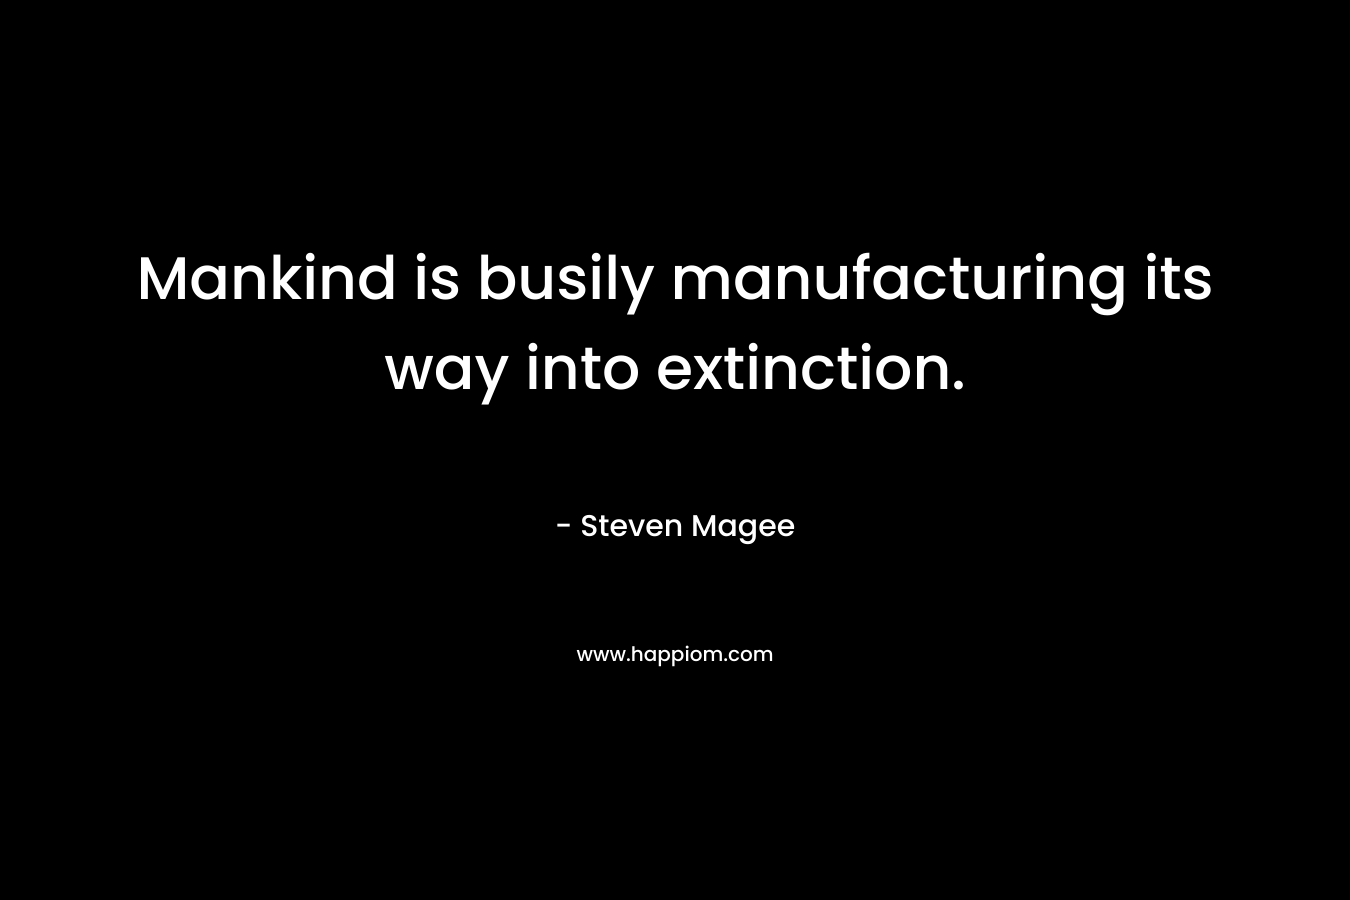 Mankind is busily manufacturing its way into extinction. – Steven Magee